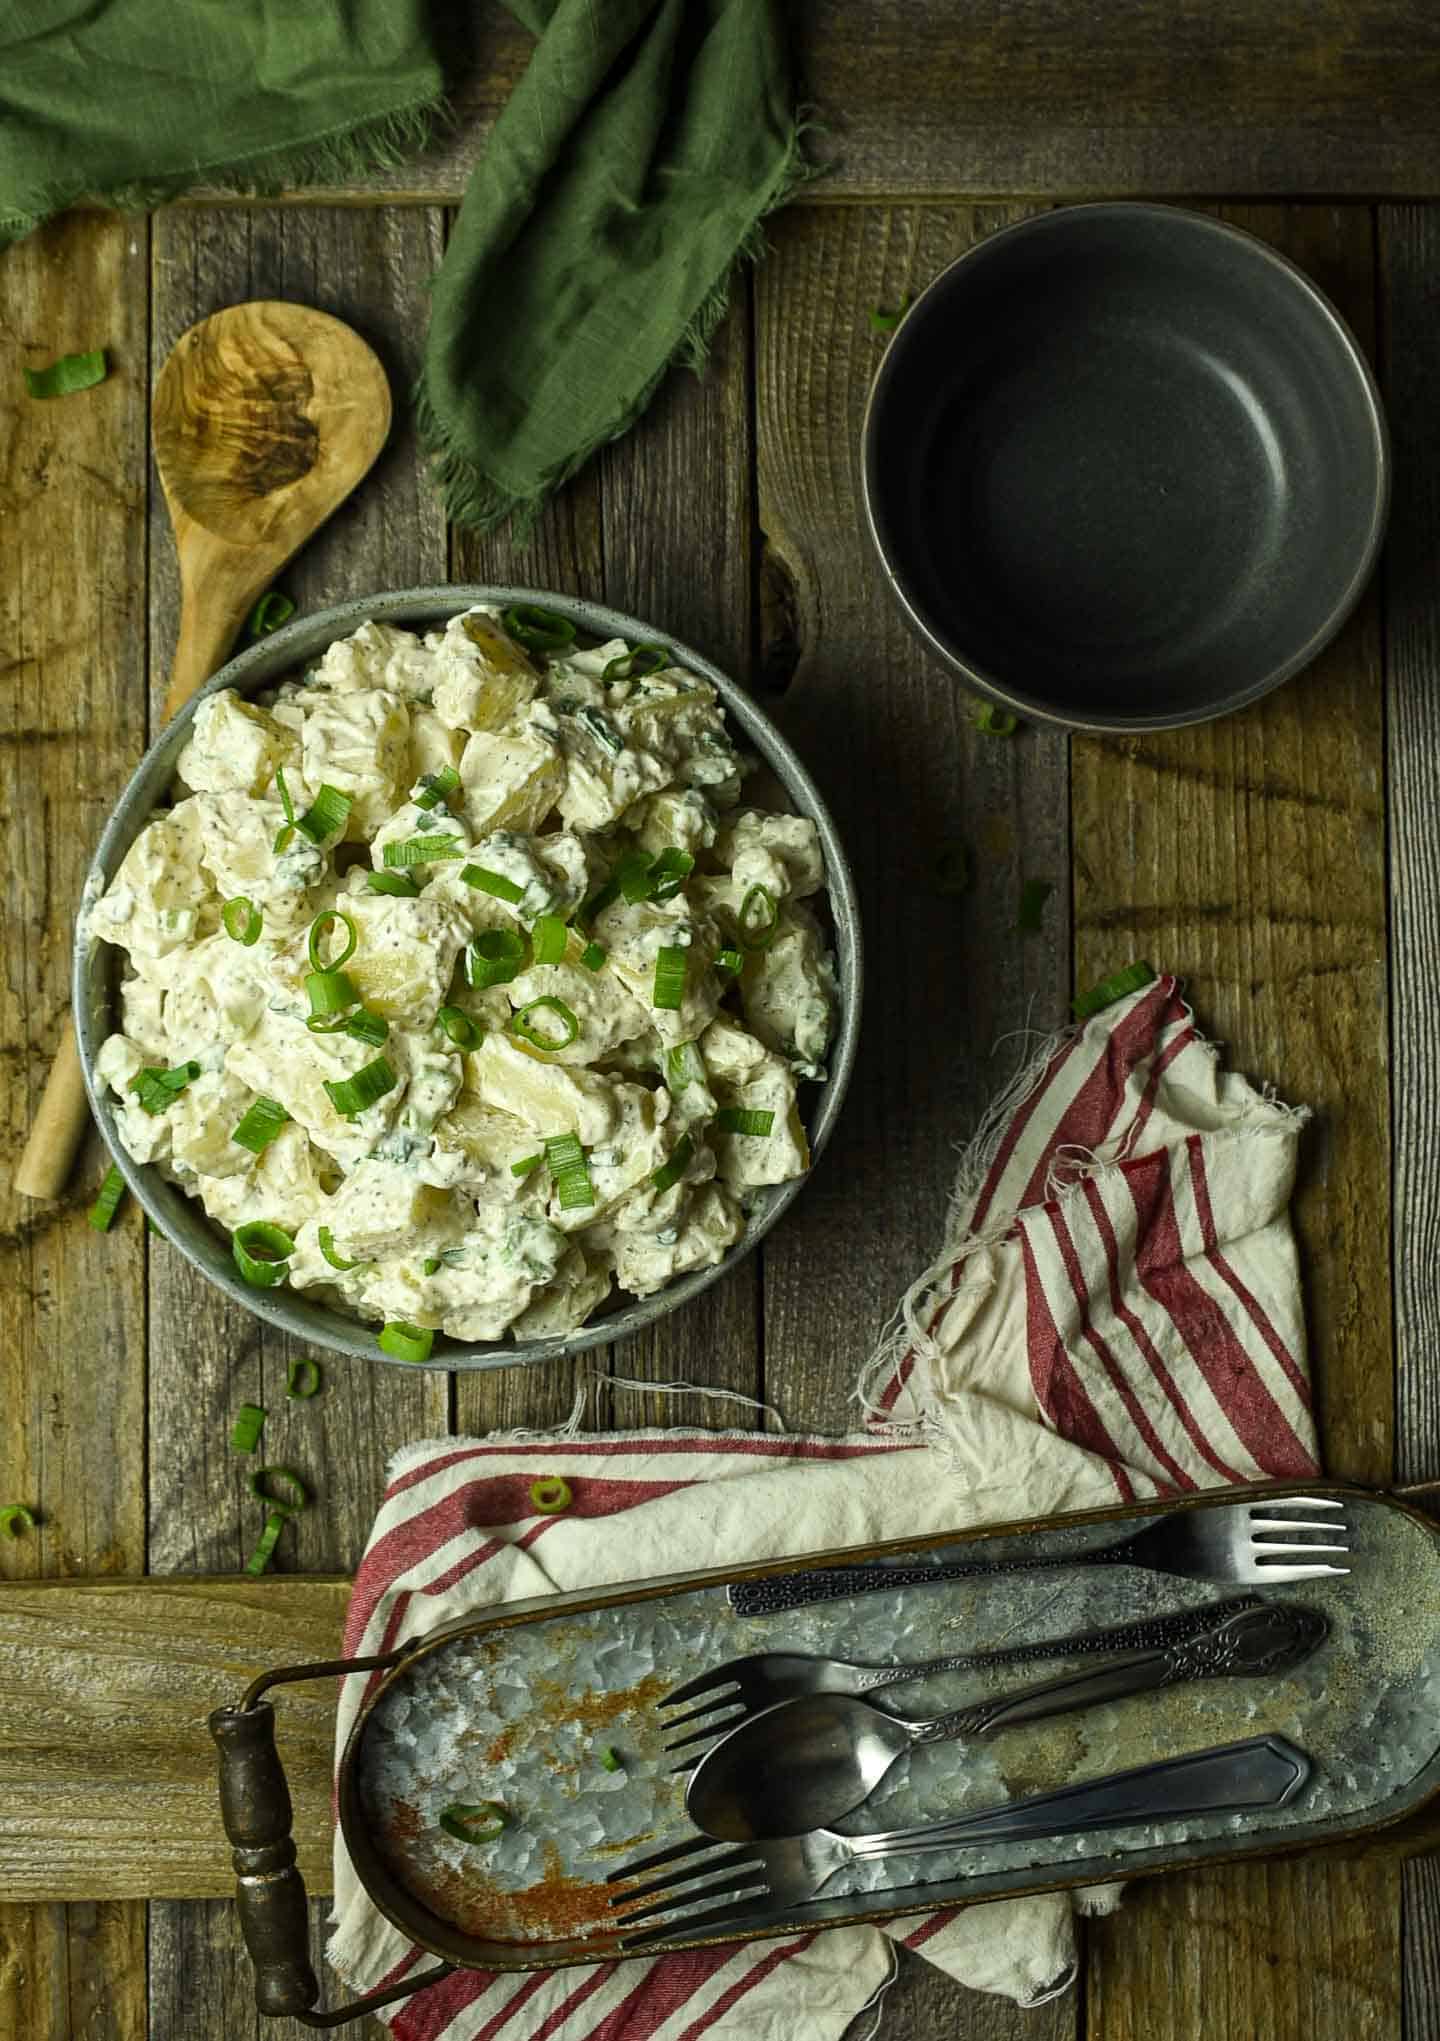 Potato salad on table with empty bowl and forks and spoonl